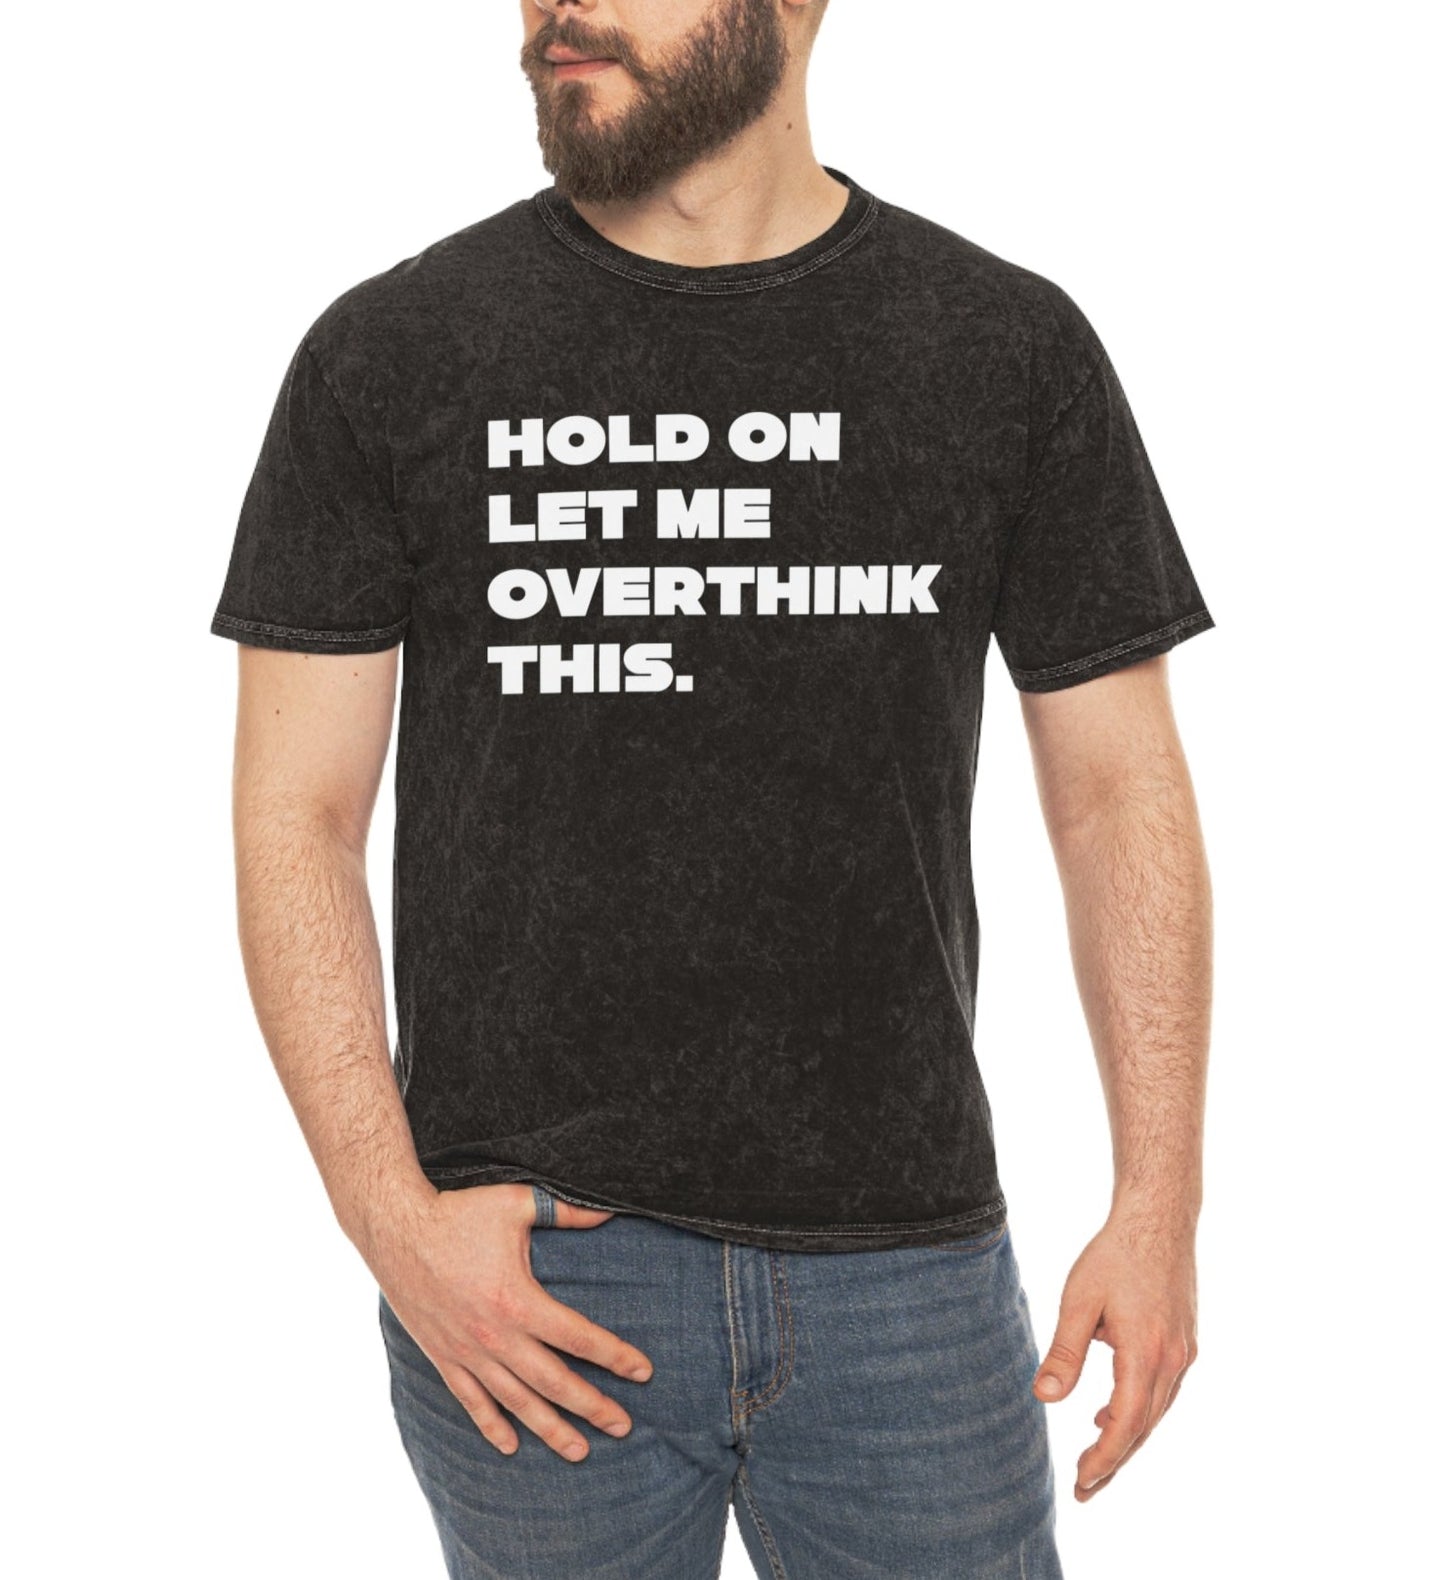 Hold On Let Me Overthink This. Unisex T-Shirt